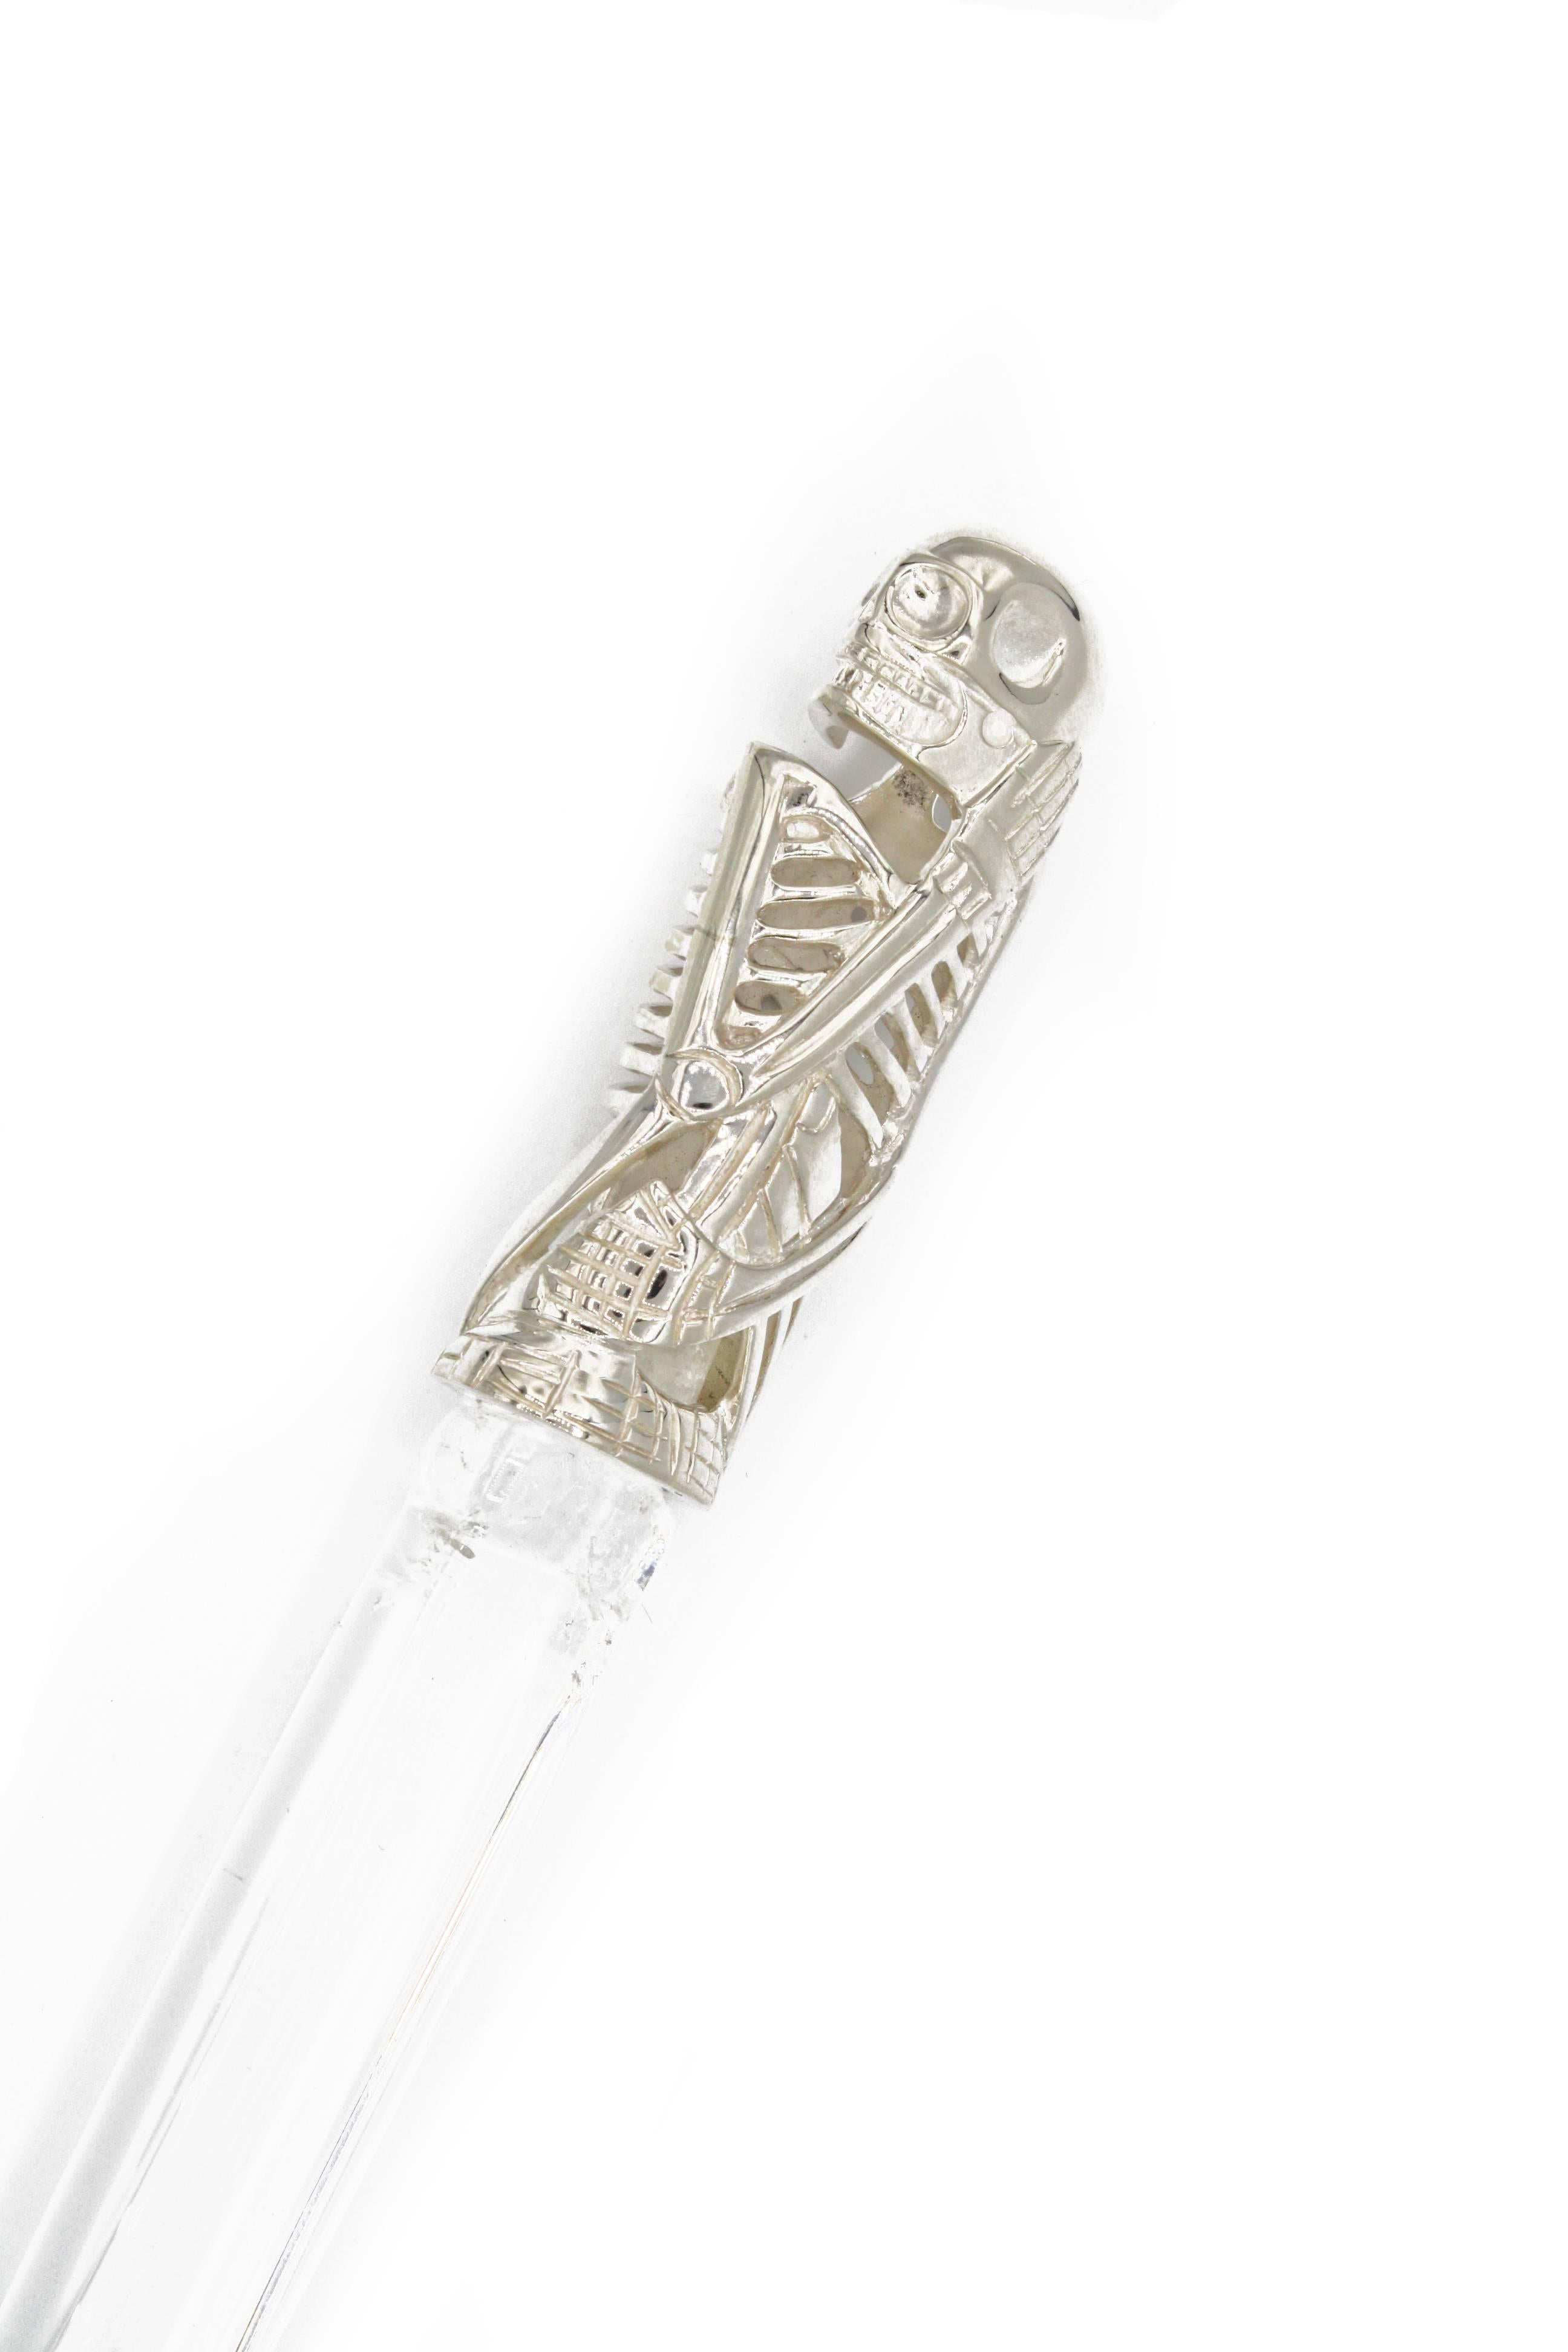 This stunning letter opener is made from natural Rock Crystal and Sterling Silver, featuring a skeleton handle.  A truly unique and sculptural desk piece or for the home.